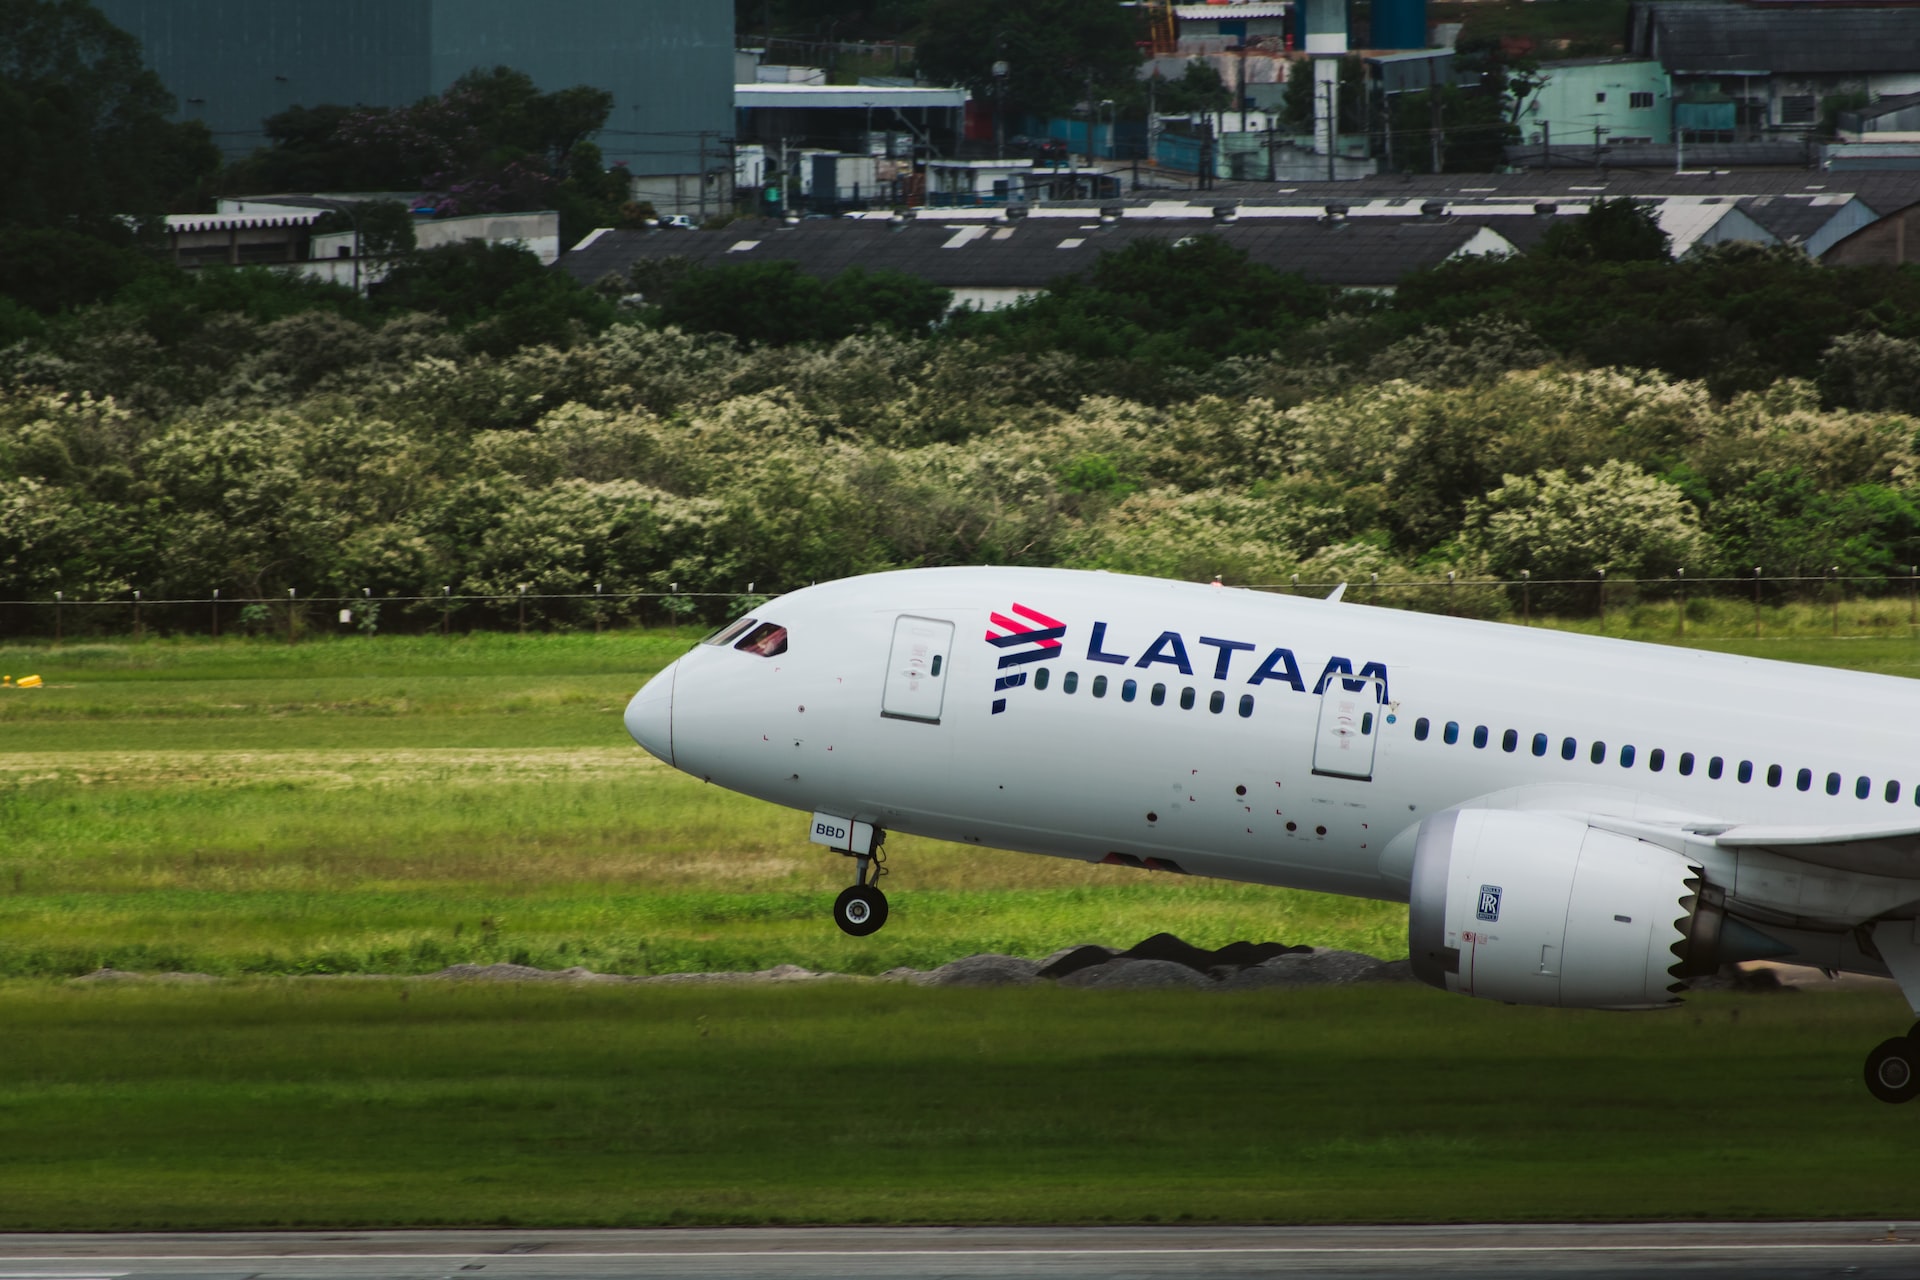 A white LATAM commercial aircraft landing on a runway.